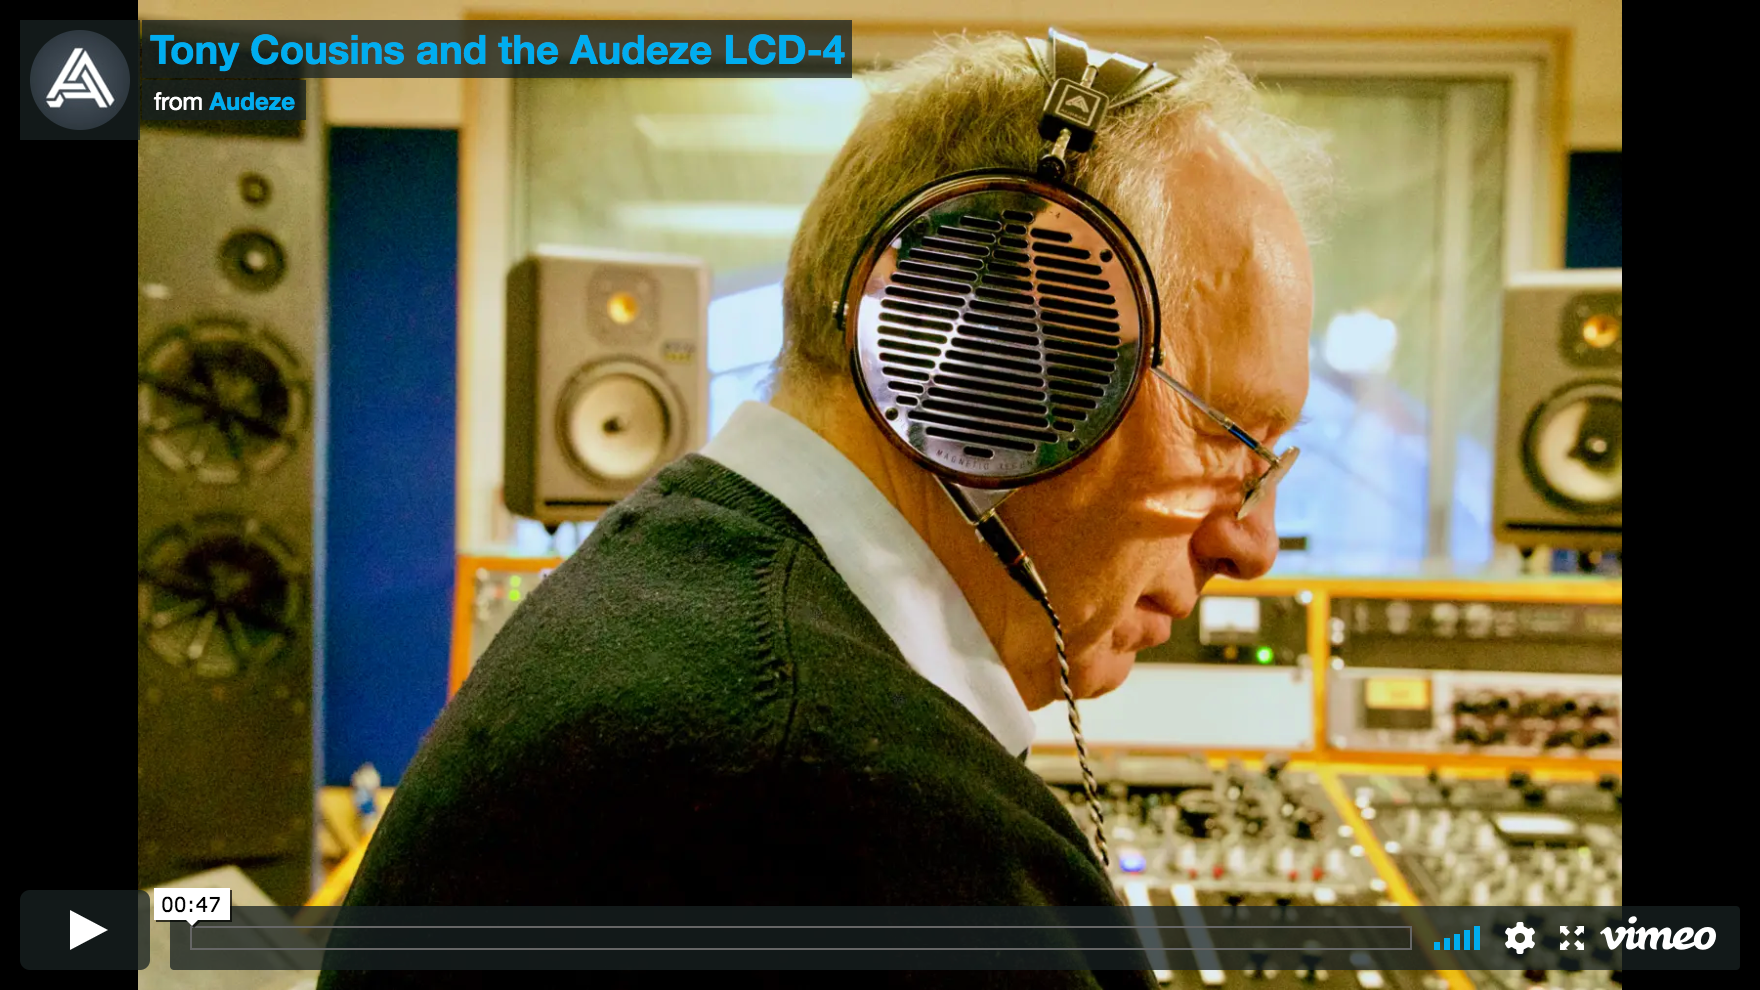 Tony Cousins prefers listening to music on the Audeze LCD-4